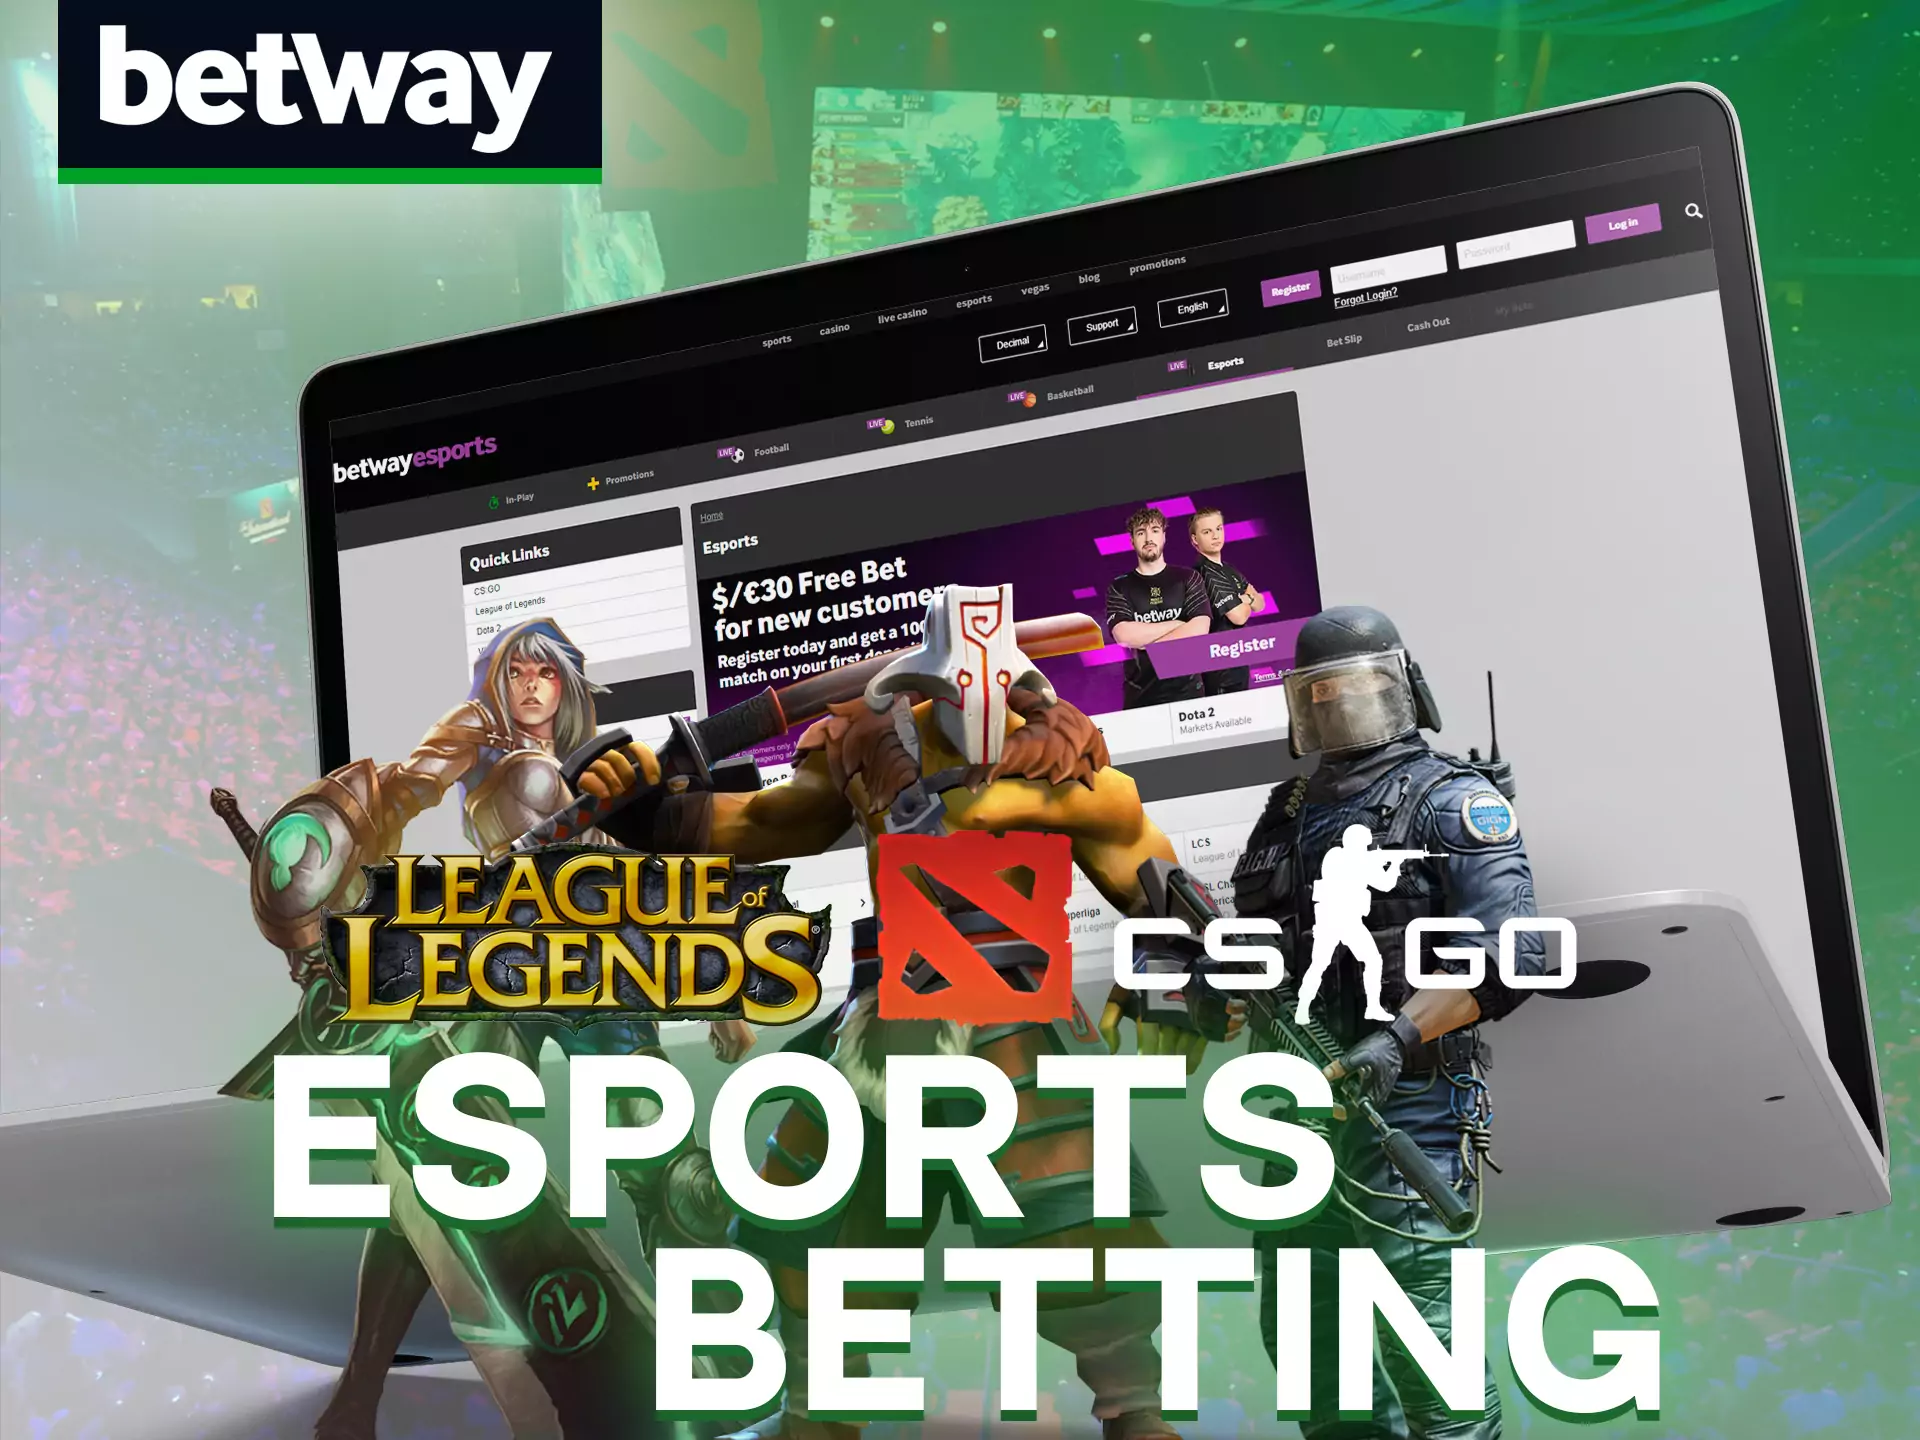 Bet on best esports team at Betway and win money.